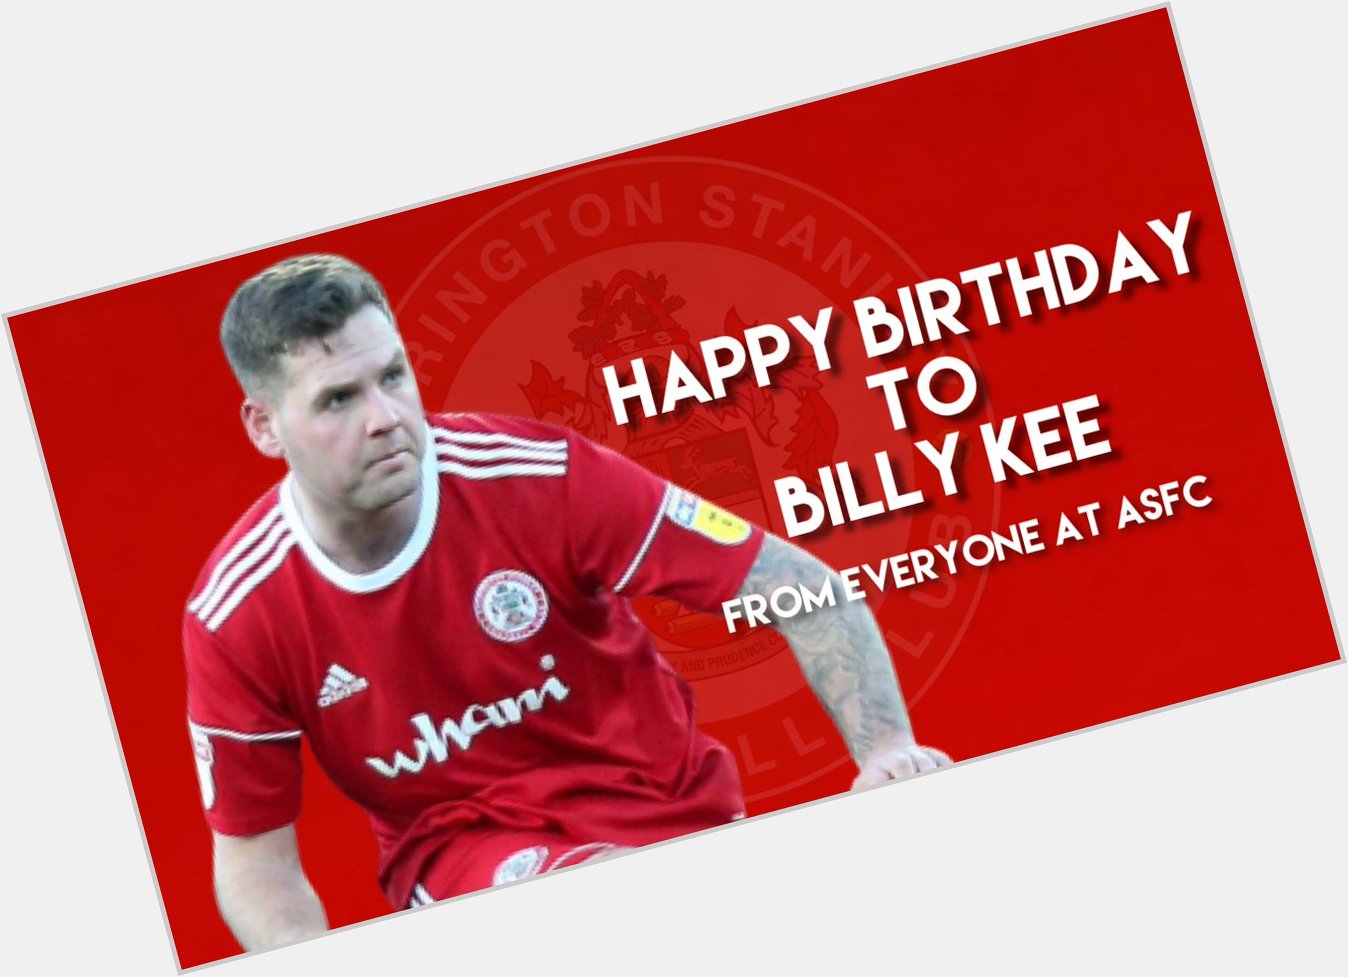  Everyone at wishes Billy Kee a happy 29th birthday! 